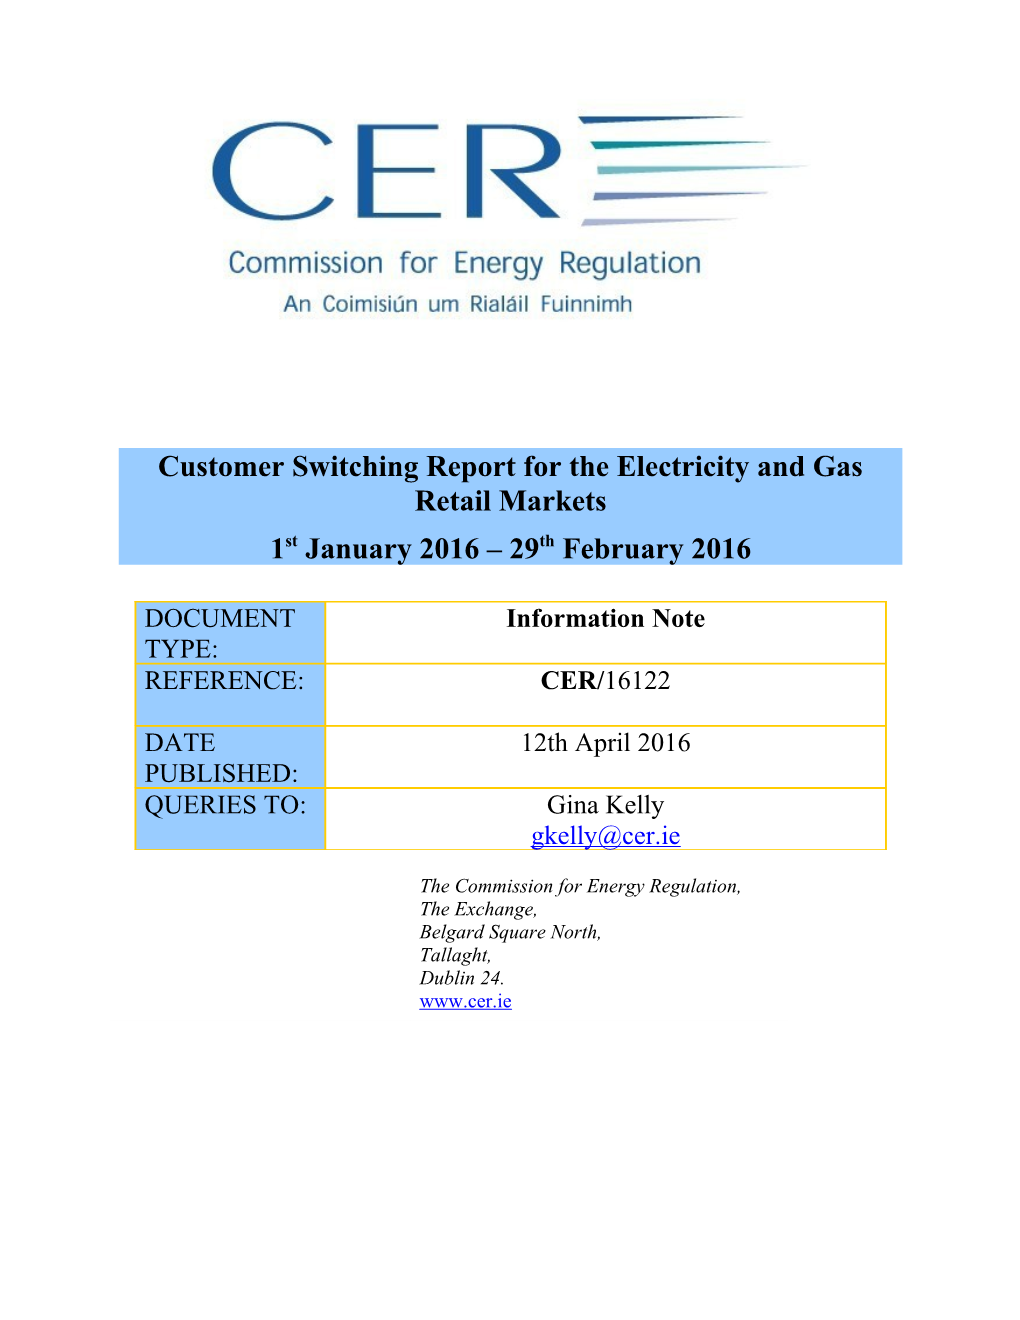 Customer Switching Report for the Electricity and Gas Retail Markets